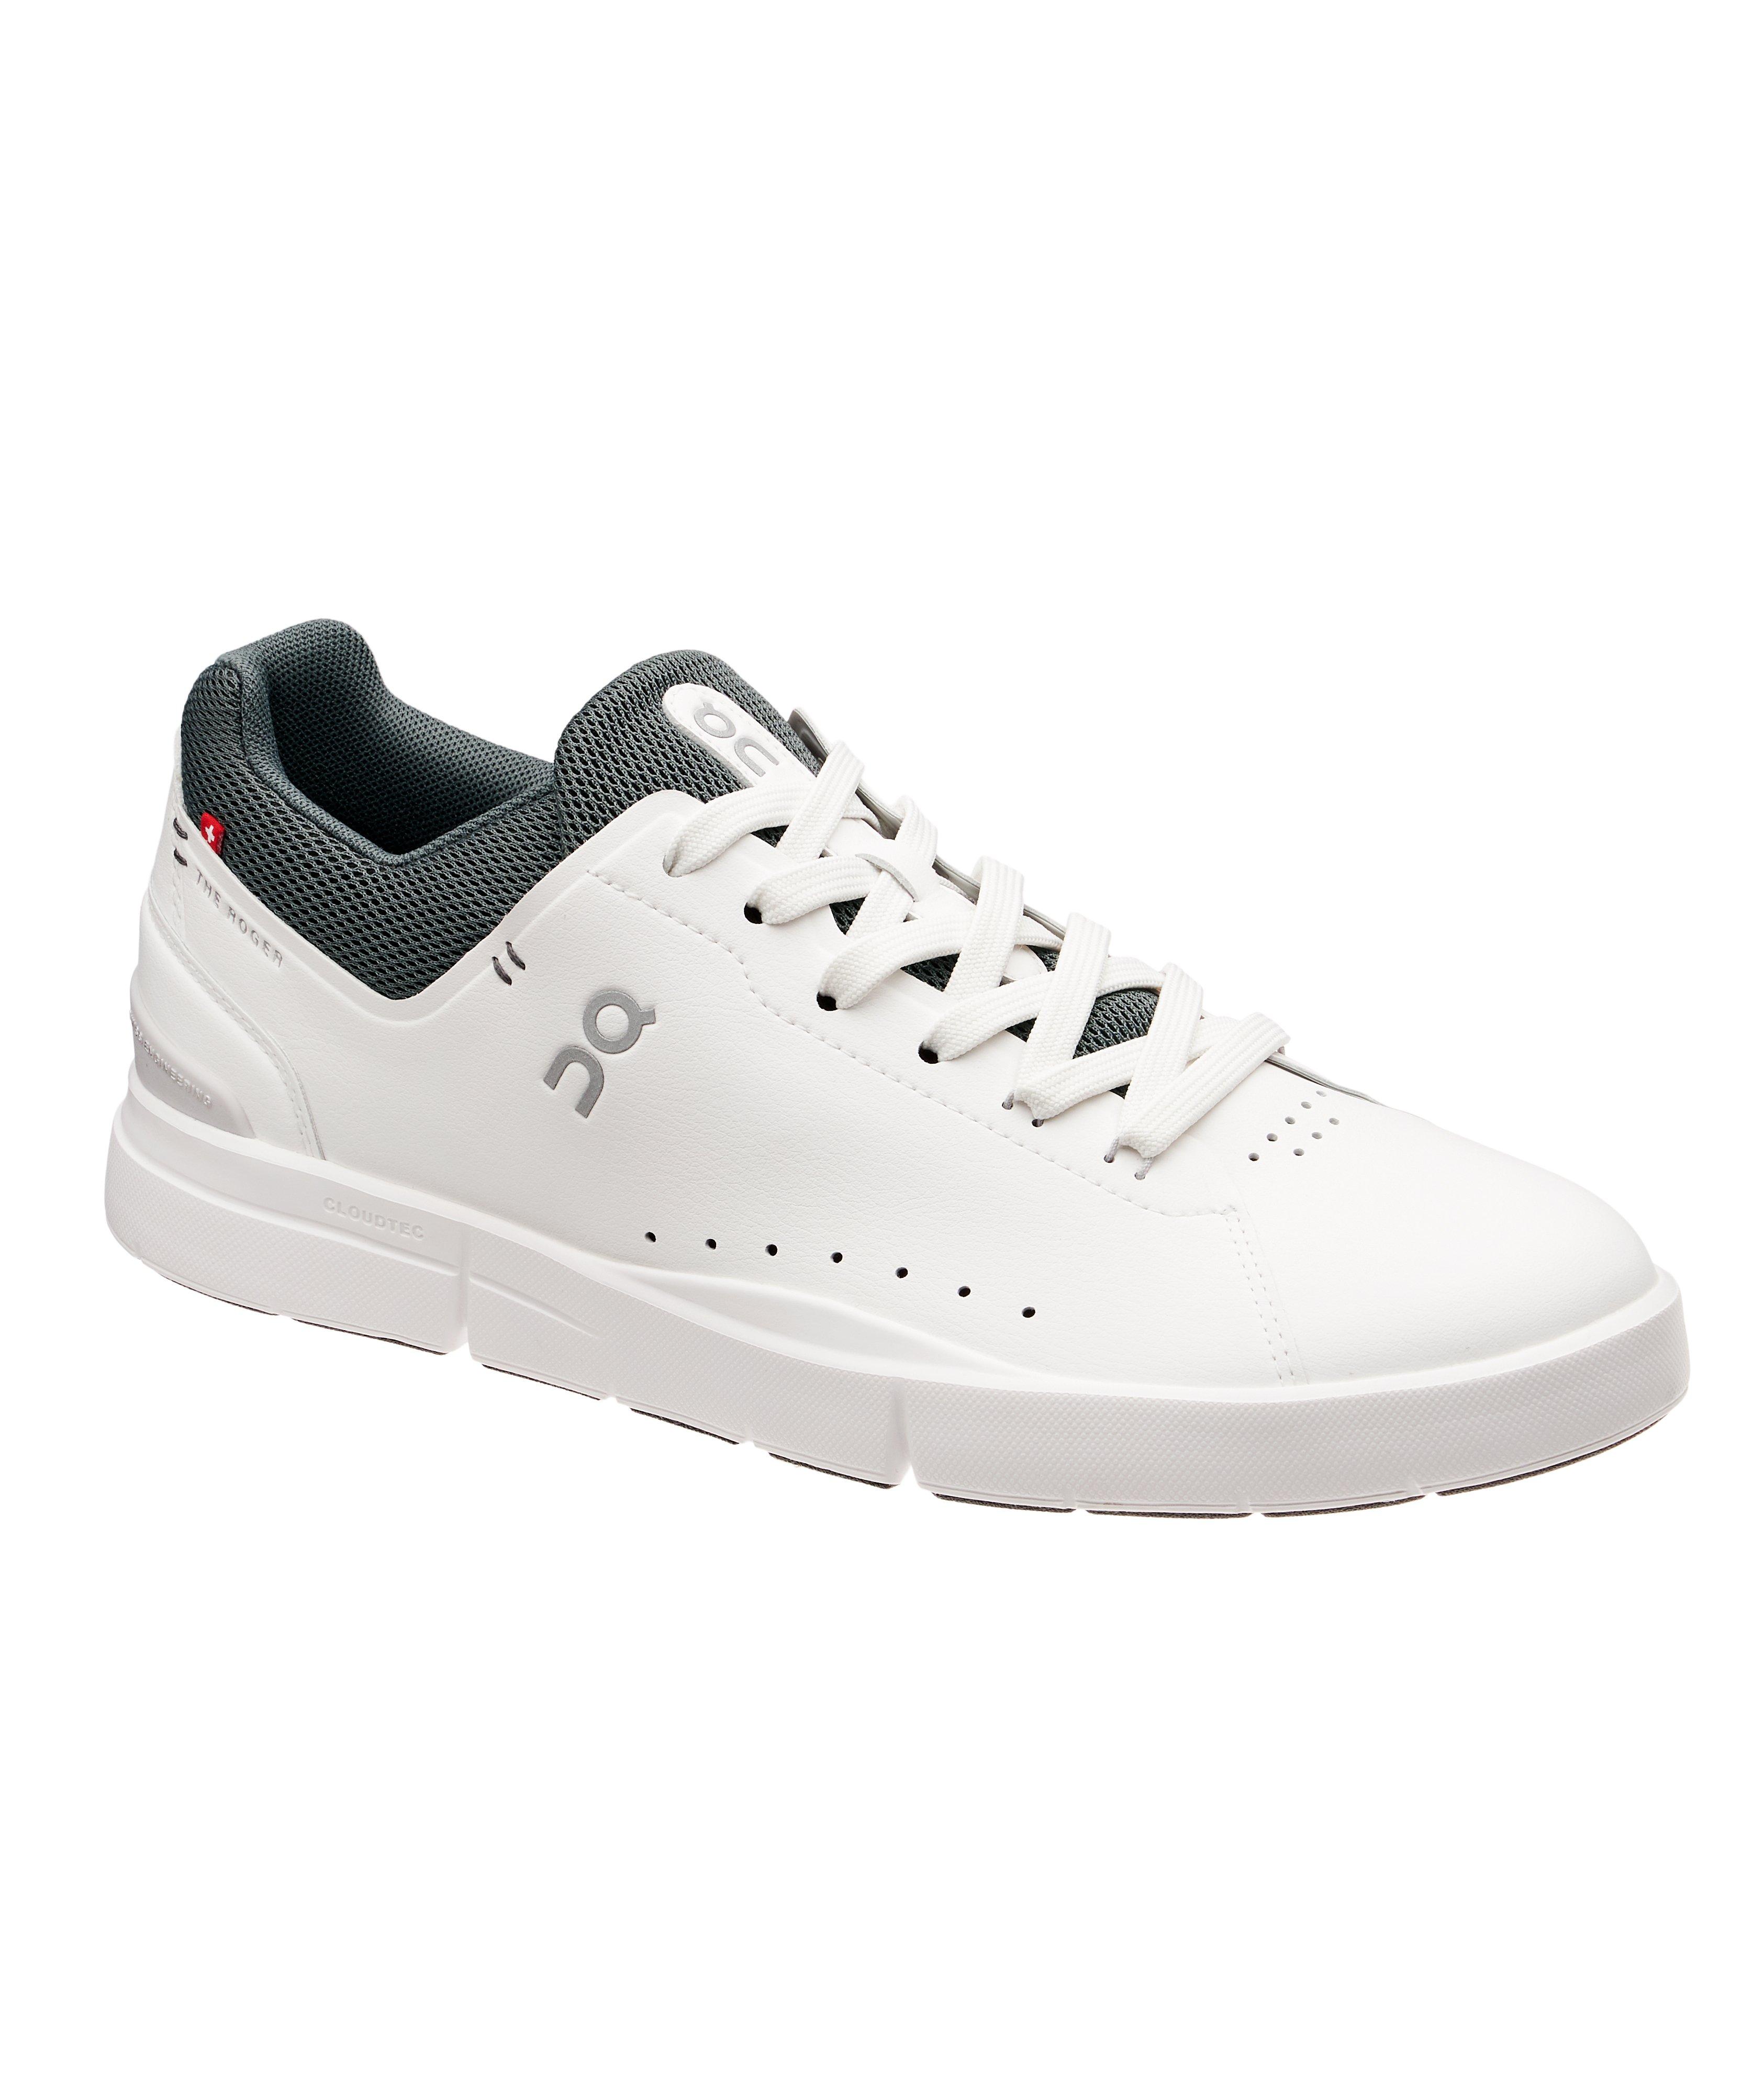 Chaussure sport The Roger Advantage image 0